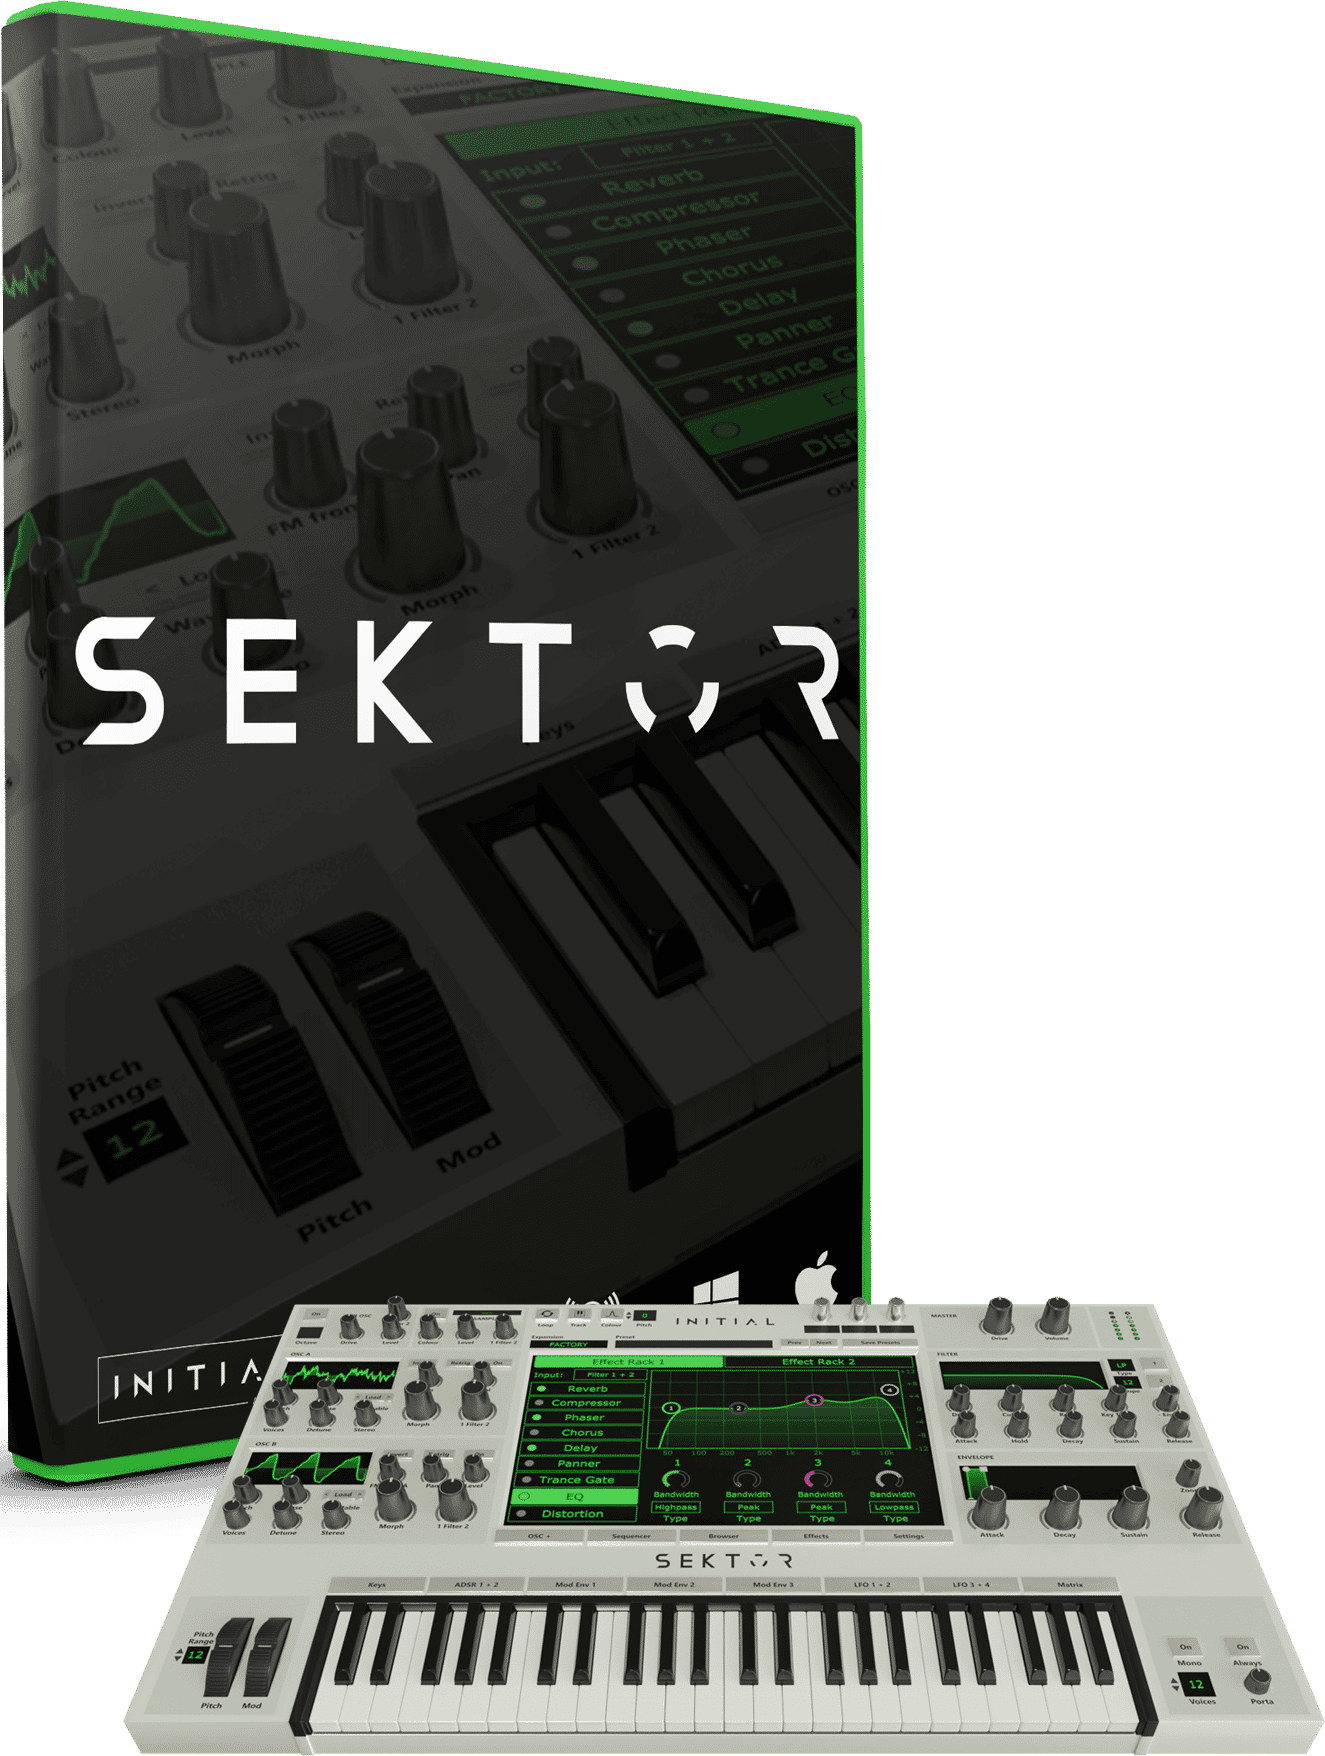 71% off “Sektor” by Initial Audio